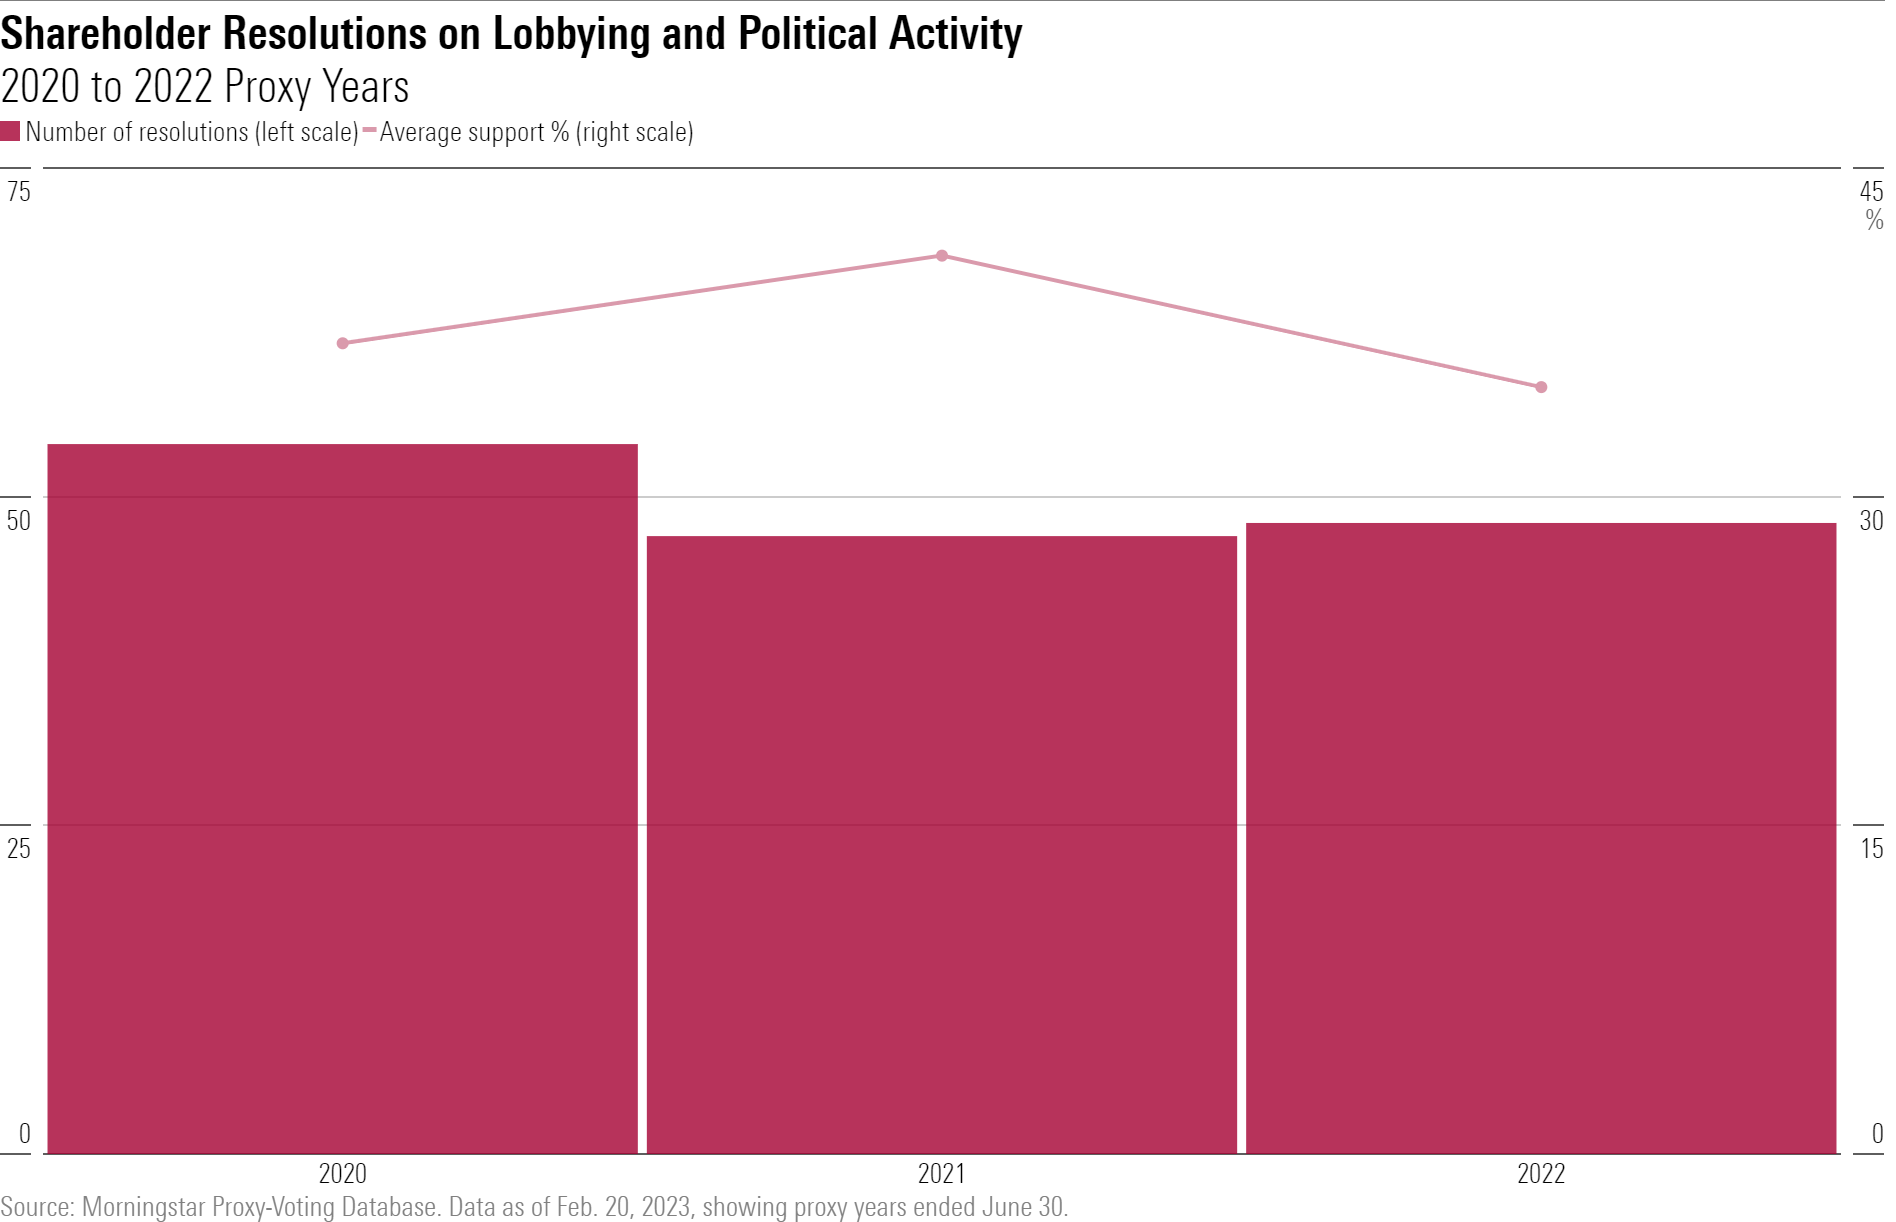 Chart showing that there have been around 50 shareholder resolutions on lobbying and political activity in each of the last three proxy years, supported by 38% of shareholders on average.